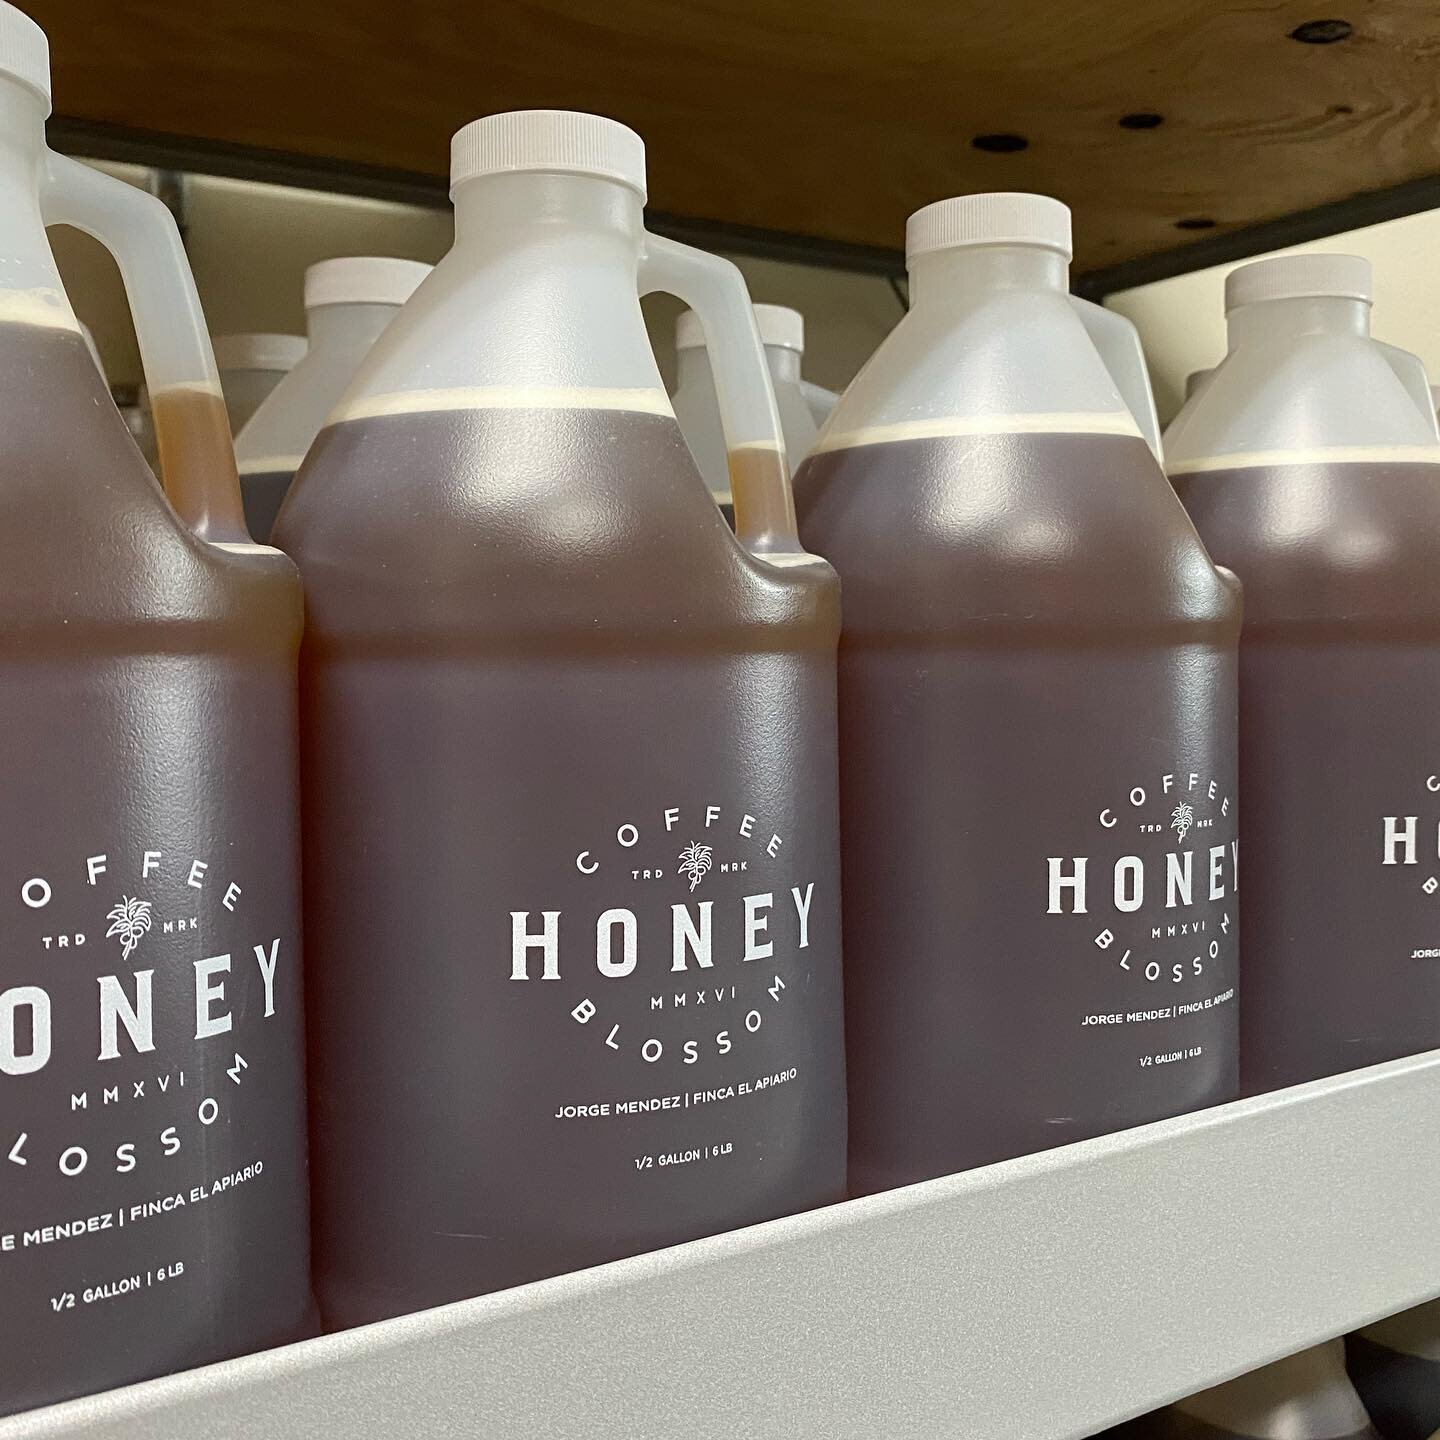 Fresh batch of half gallon jugs for all our friends. Coffee shops. Bakeries. Meaderies. Connoisseurs. Come one, come all. 

Wholesale pricing available!

#coffeeblossomhoney #coffee #tea #honey #mead #meadmaking  #guatemala #organic #singleorigin #th